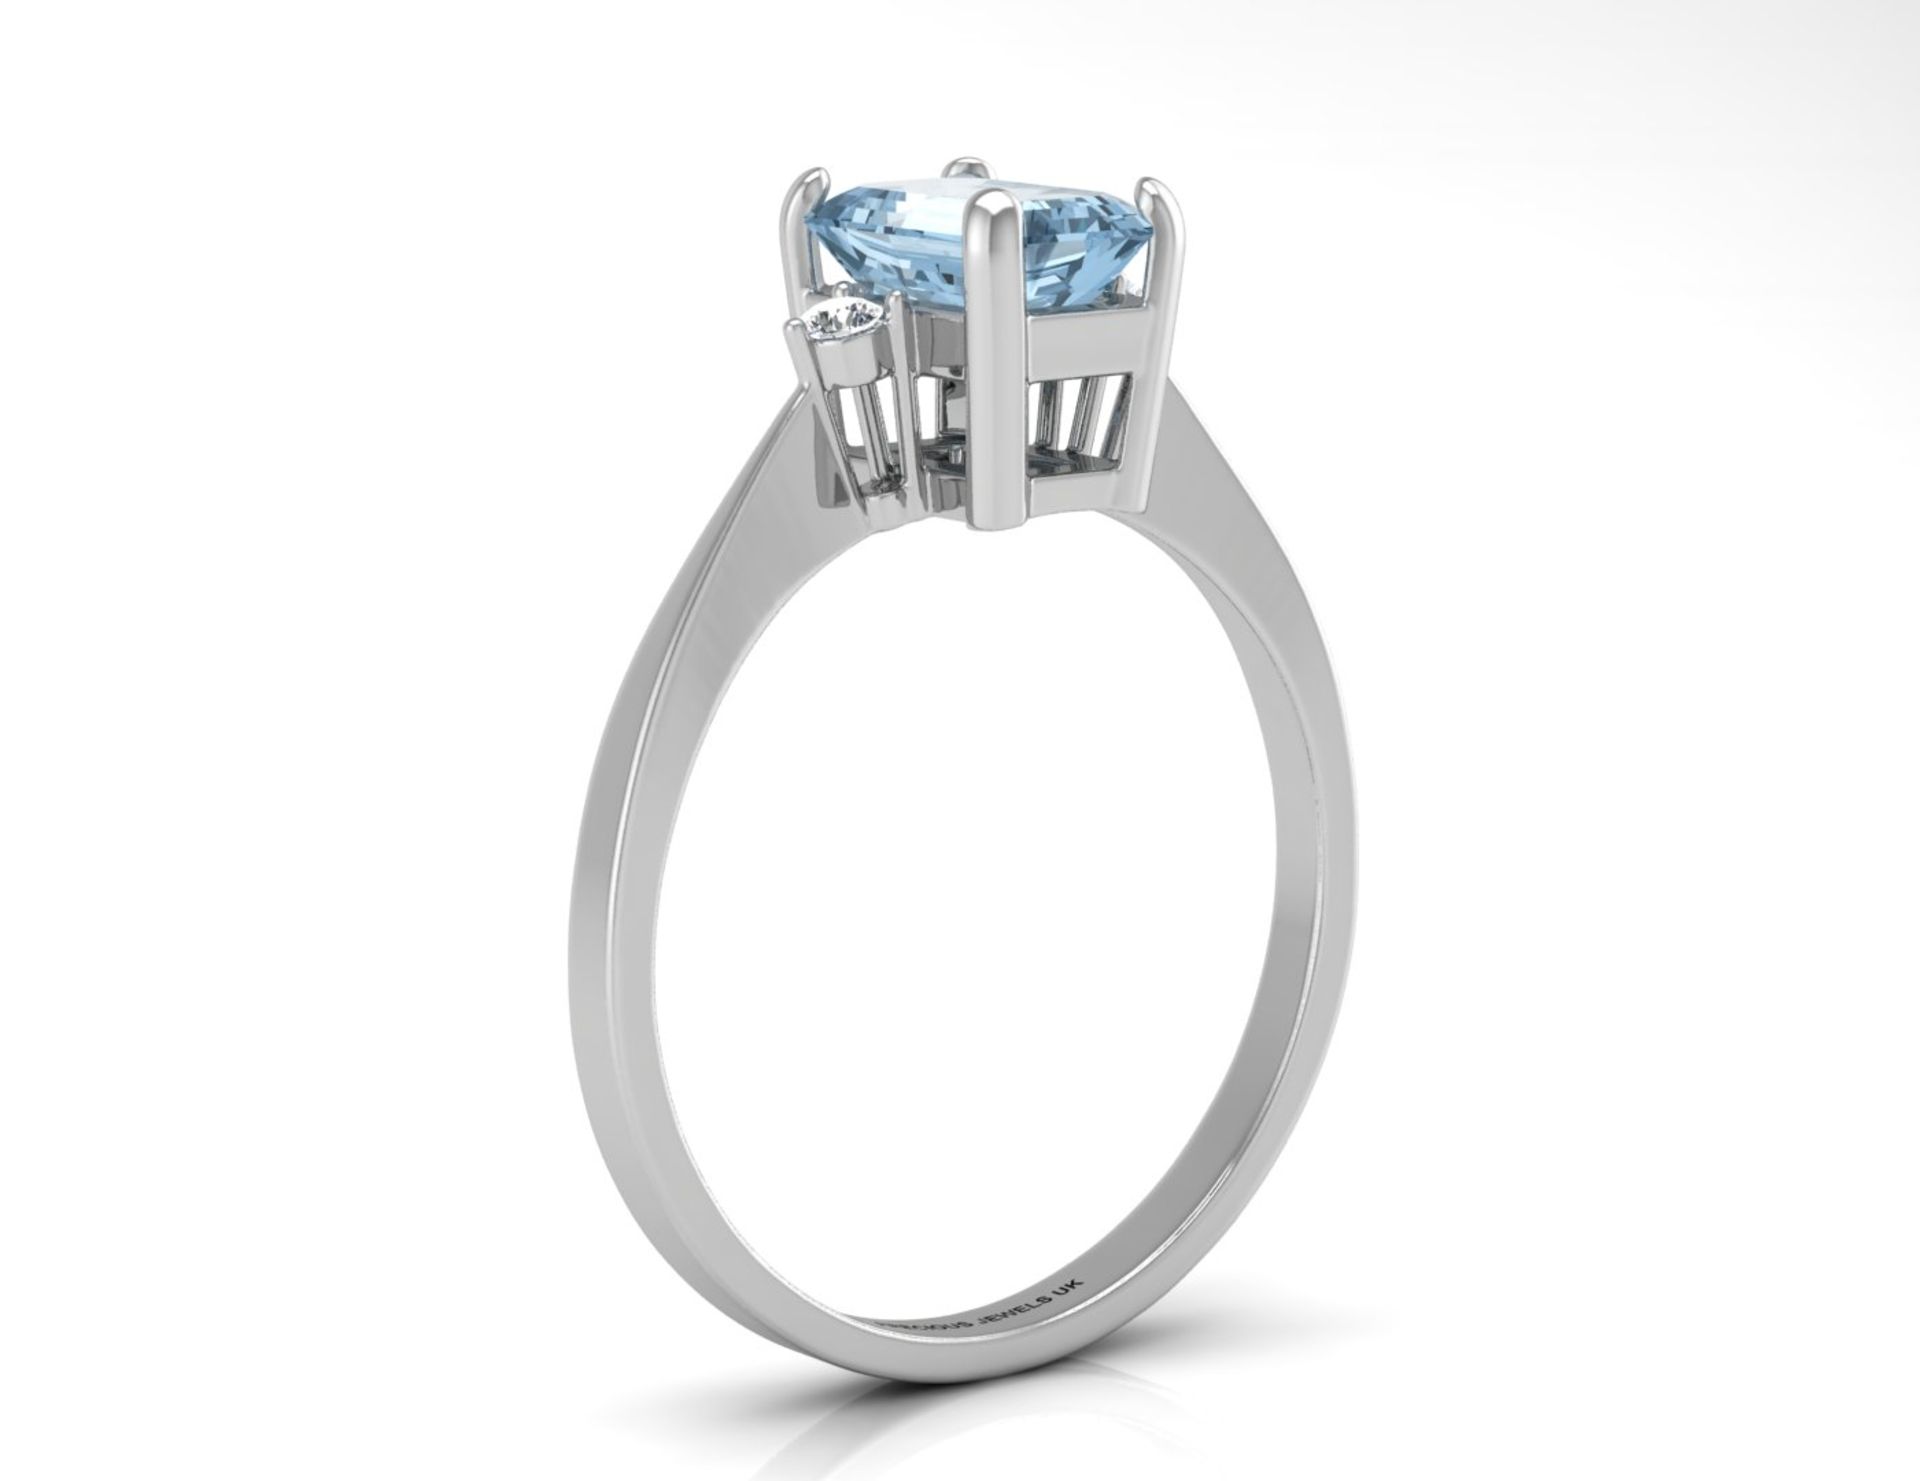 9ct White Gold Diamond And Emerald Cut Blue Topaz Ring (BT1.21) 0.04 Carats - Valued By GIE £1,495. - Image 2 of 5